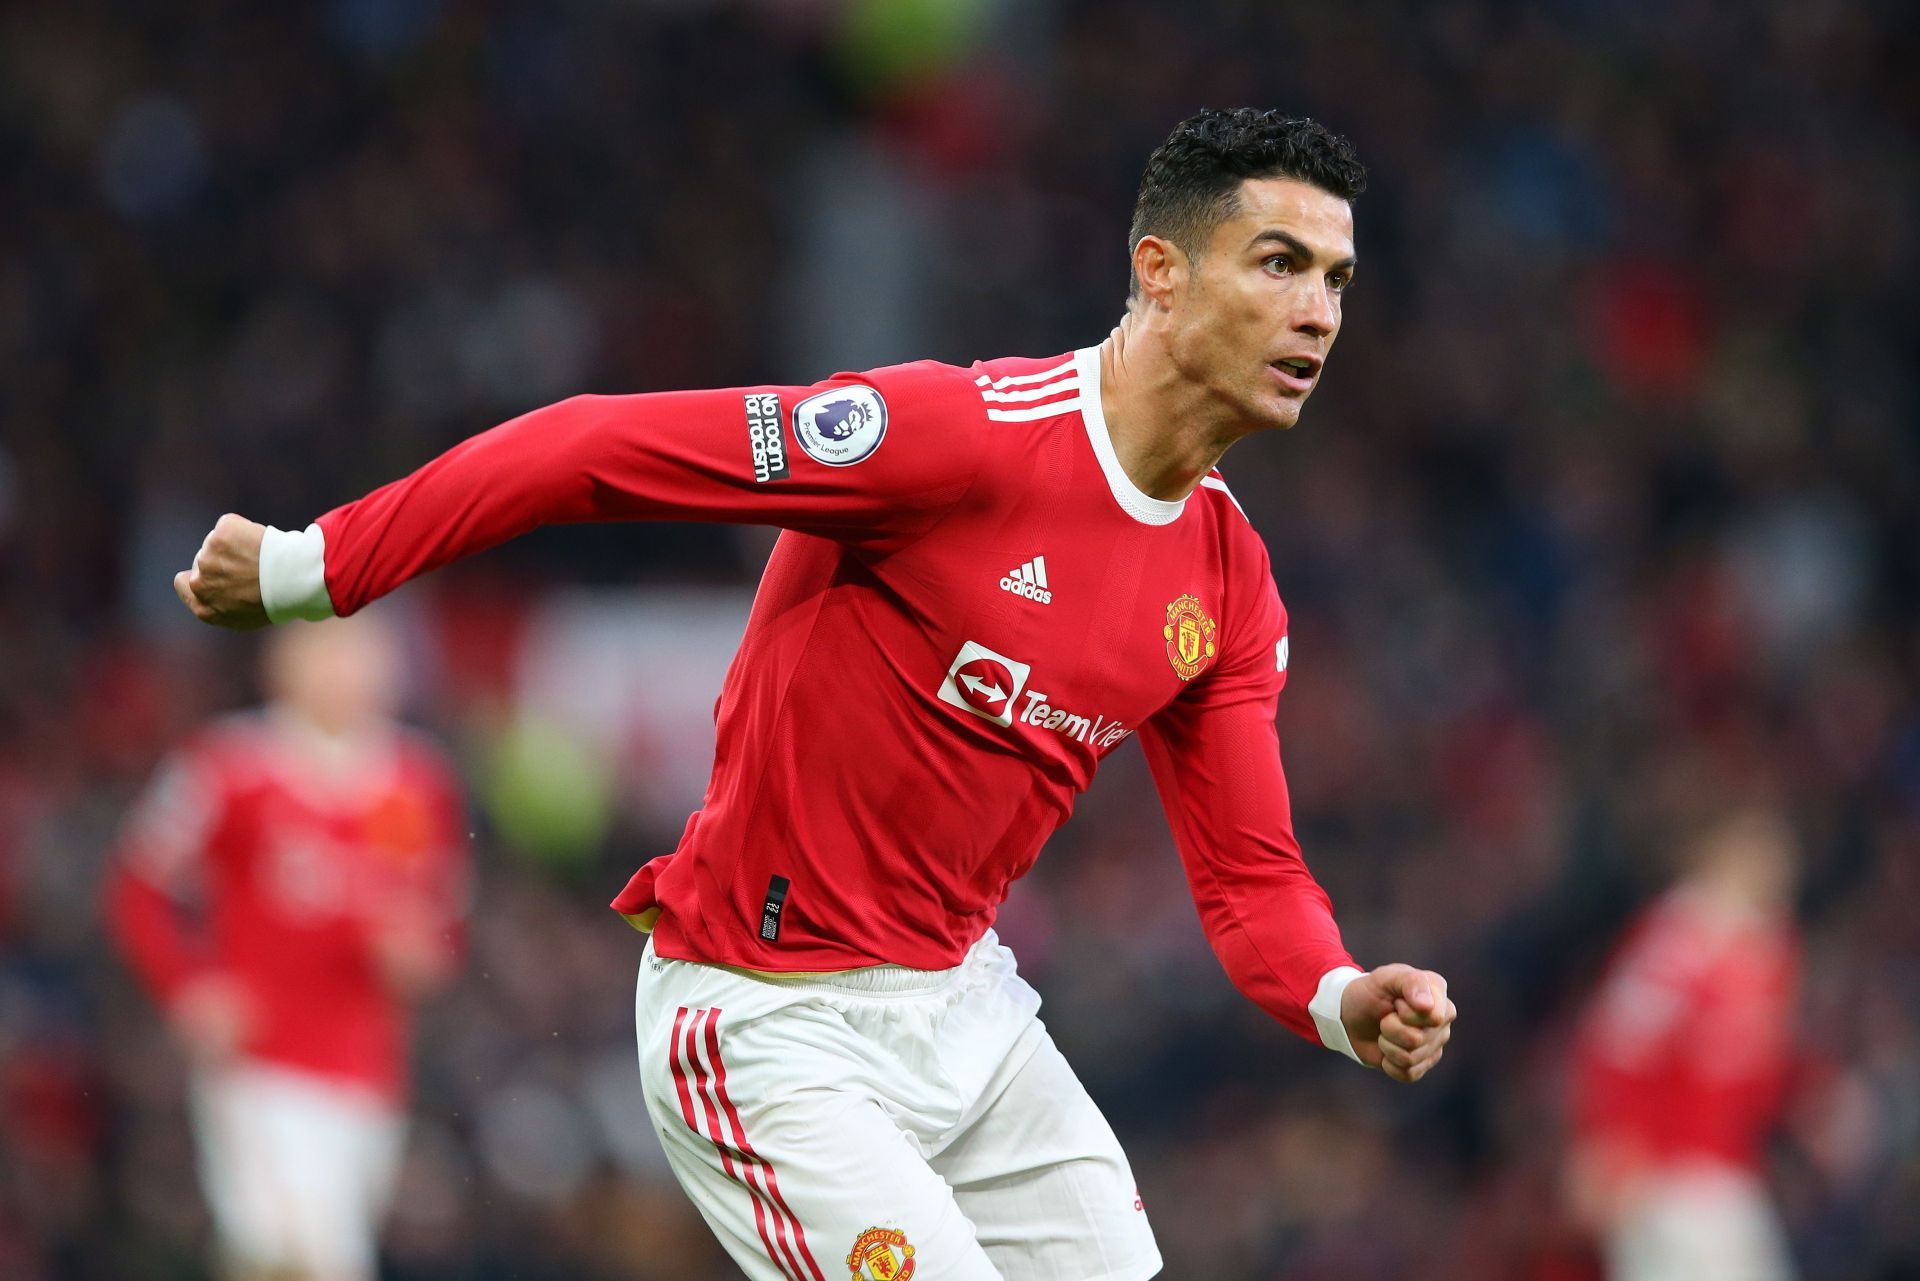 Cristiano Ronaldo in action for Manchester United